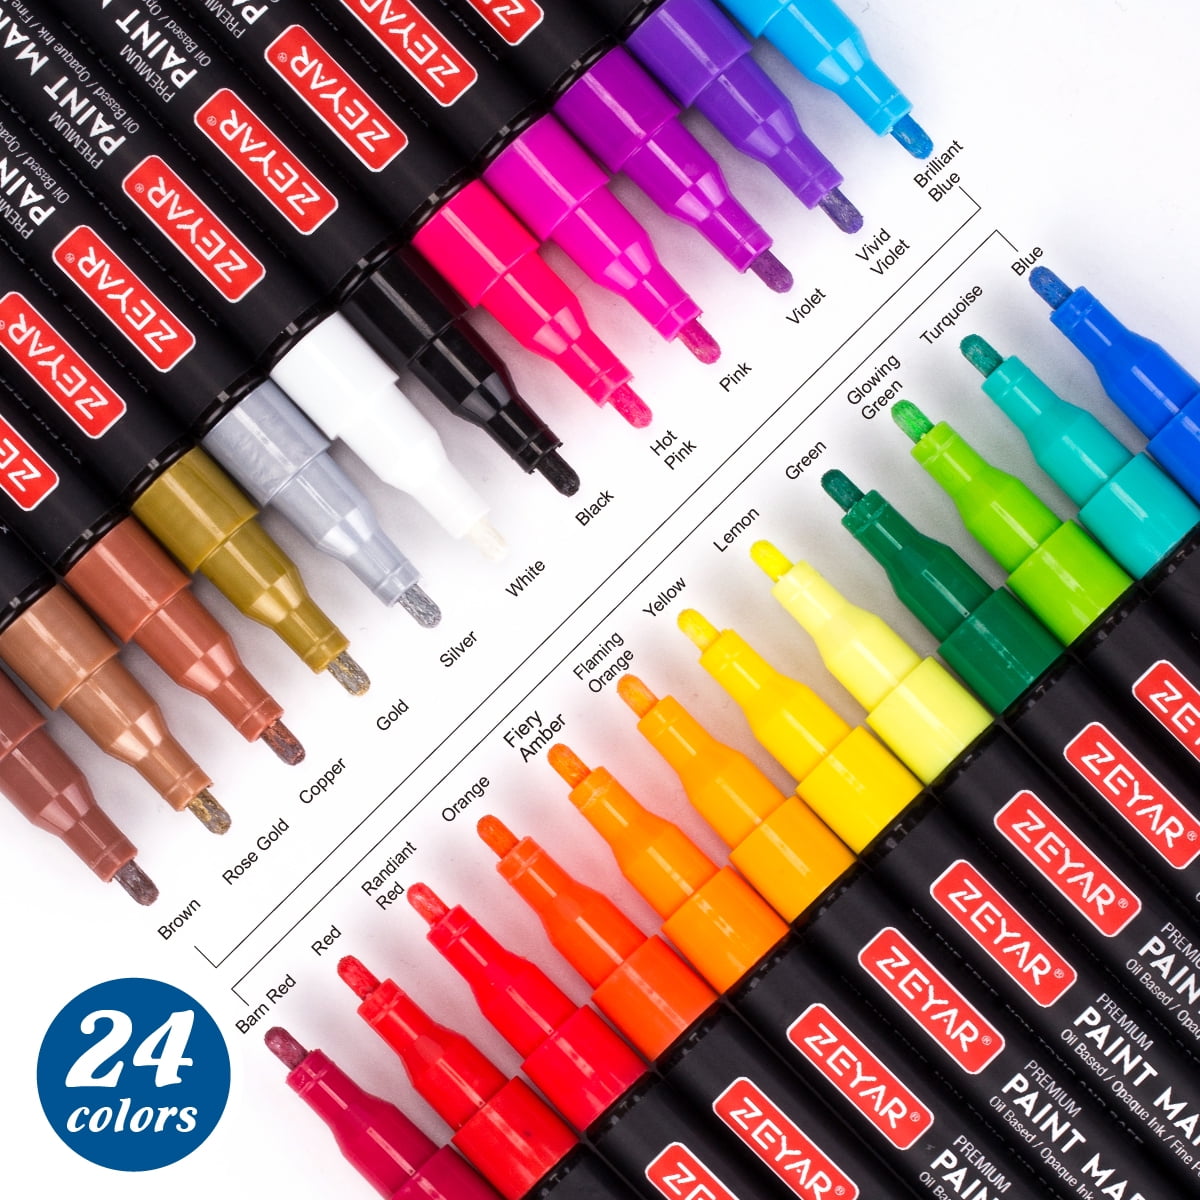 ZEYAR Dual Tip Acrylic Paint Pen Metallic Colors, Board and Extra Fine  Tips, Patented Product, AP Certified, Waterproof Ink, Works on Rock, Wood